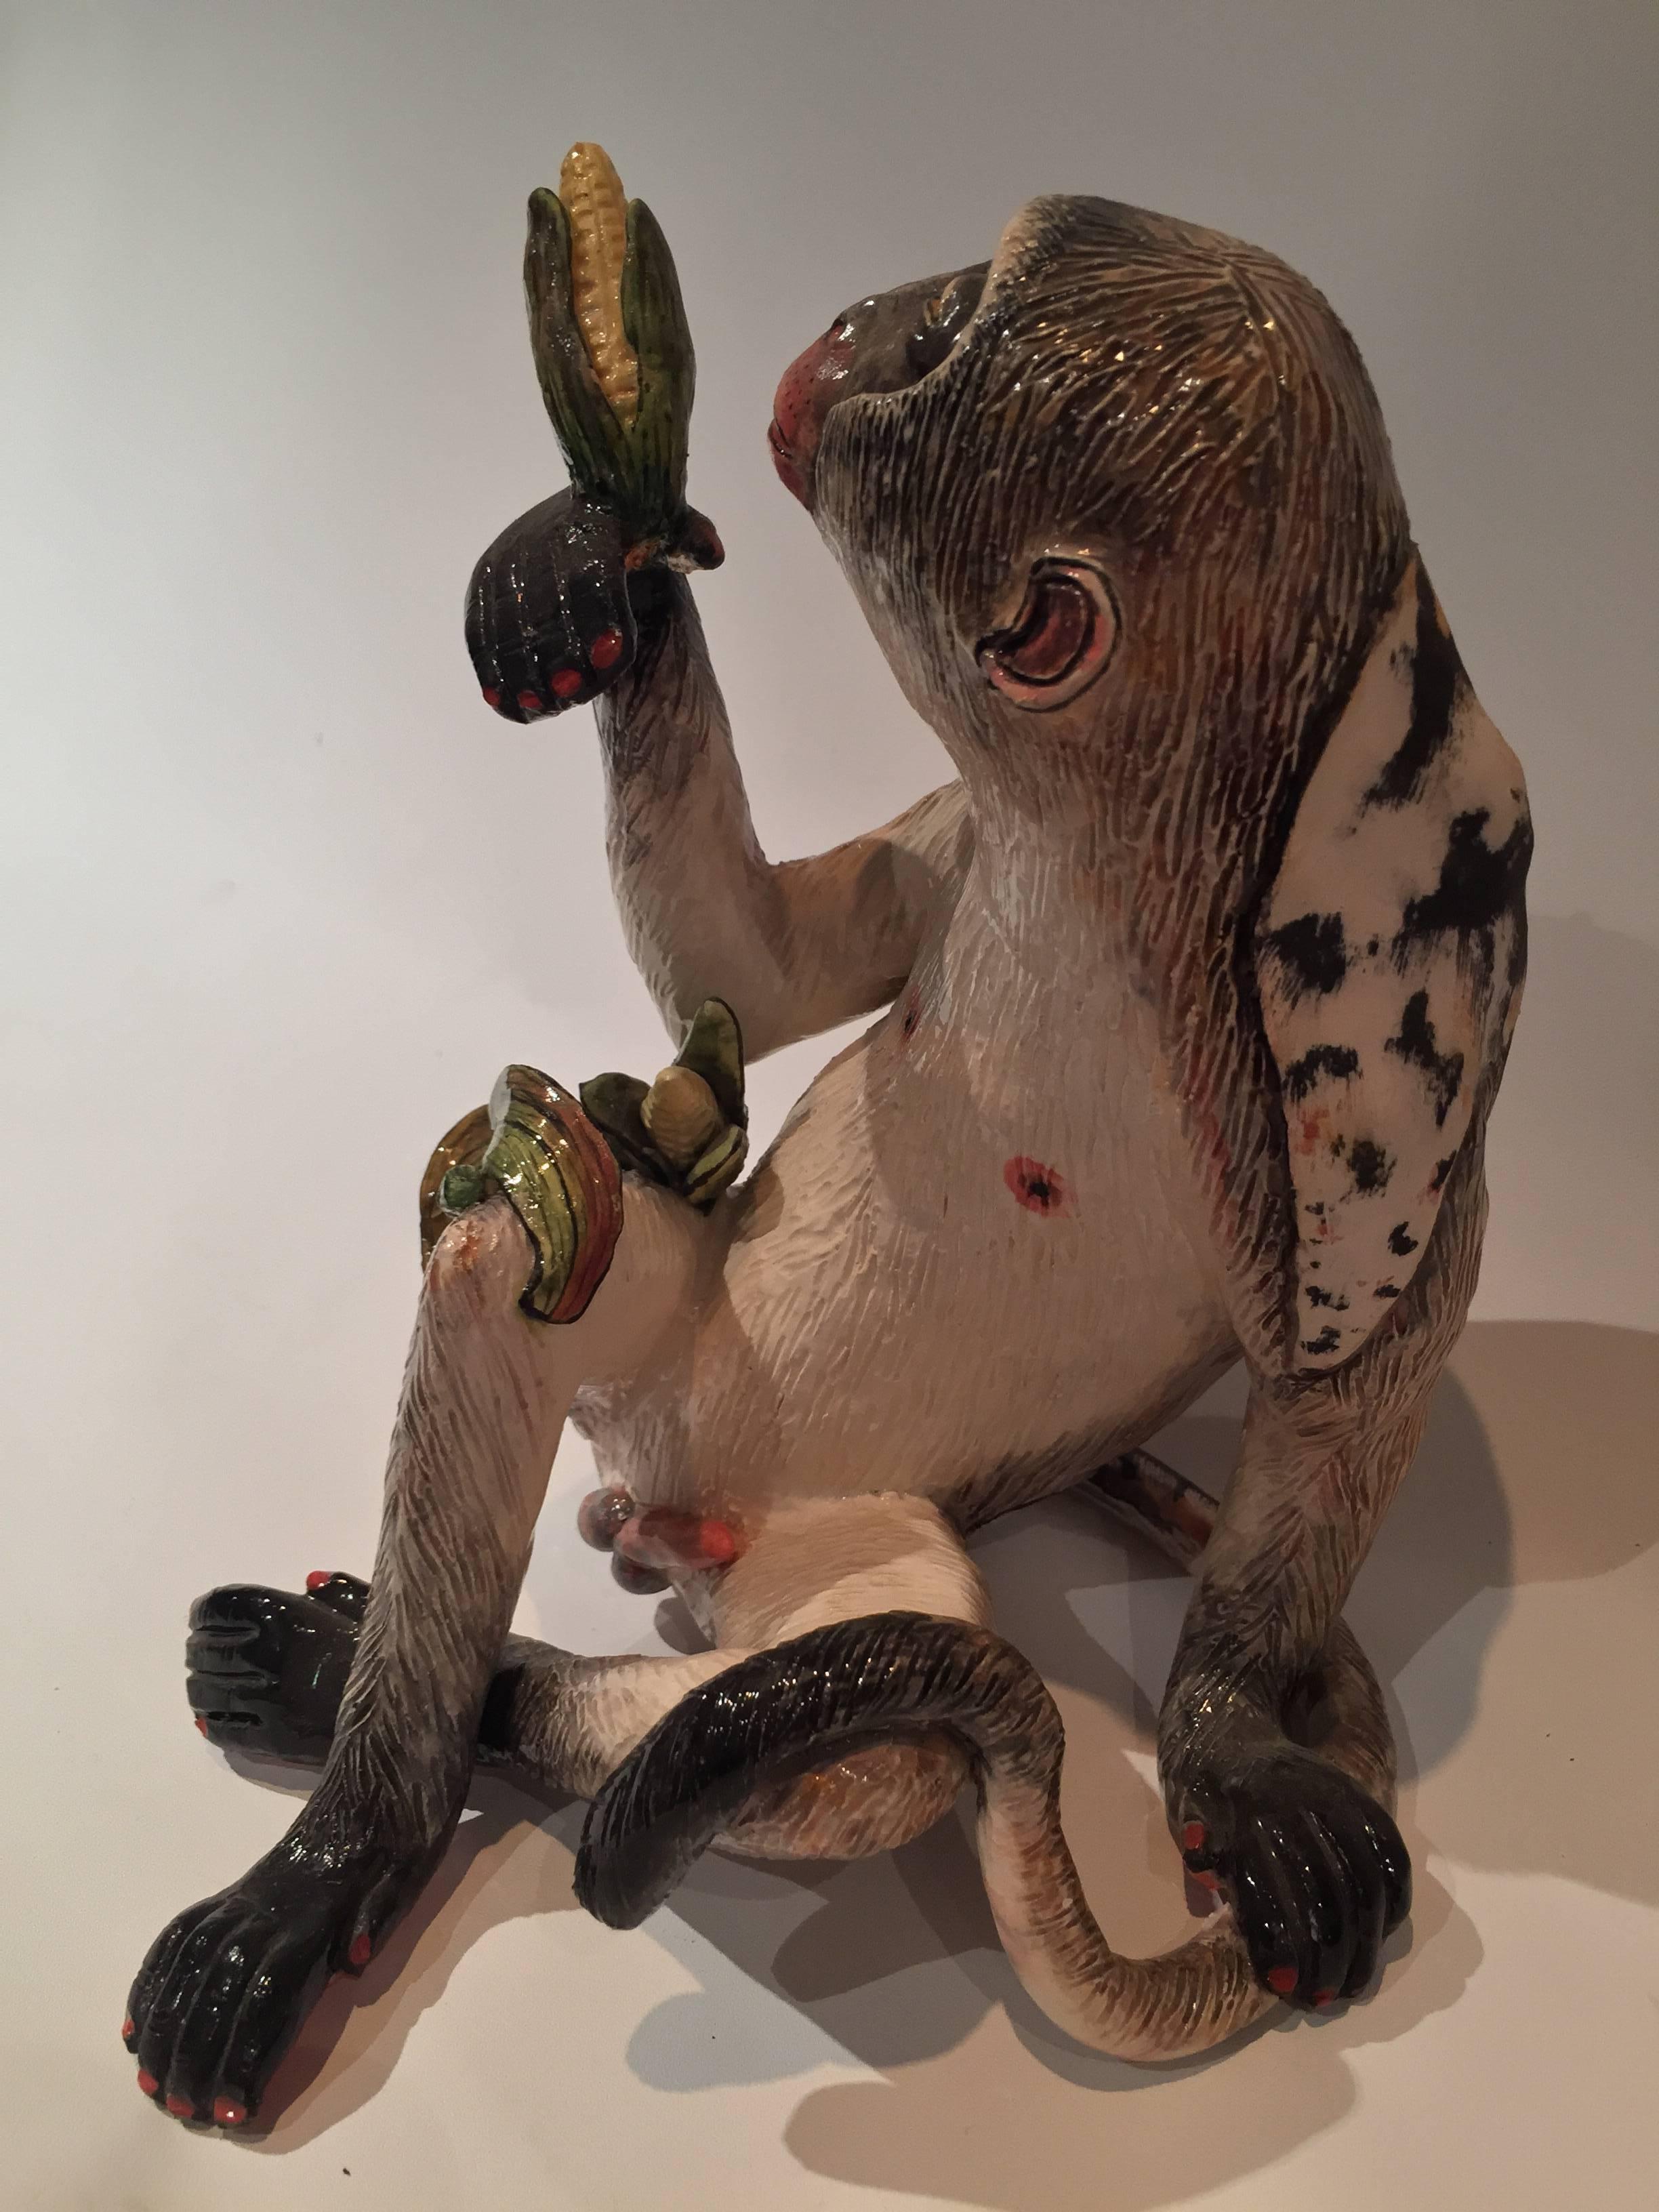 Monkey Sculpture, ceramic by Ardmore from South Africa. Sculpted by Engelbert Nyoni, painted by Elvis Mkhize. 6